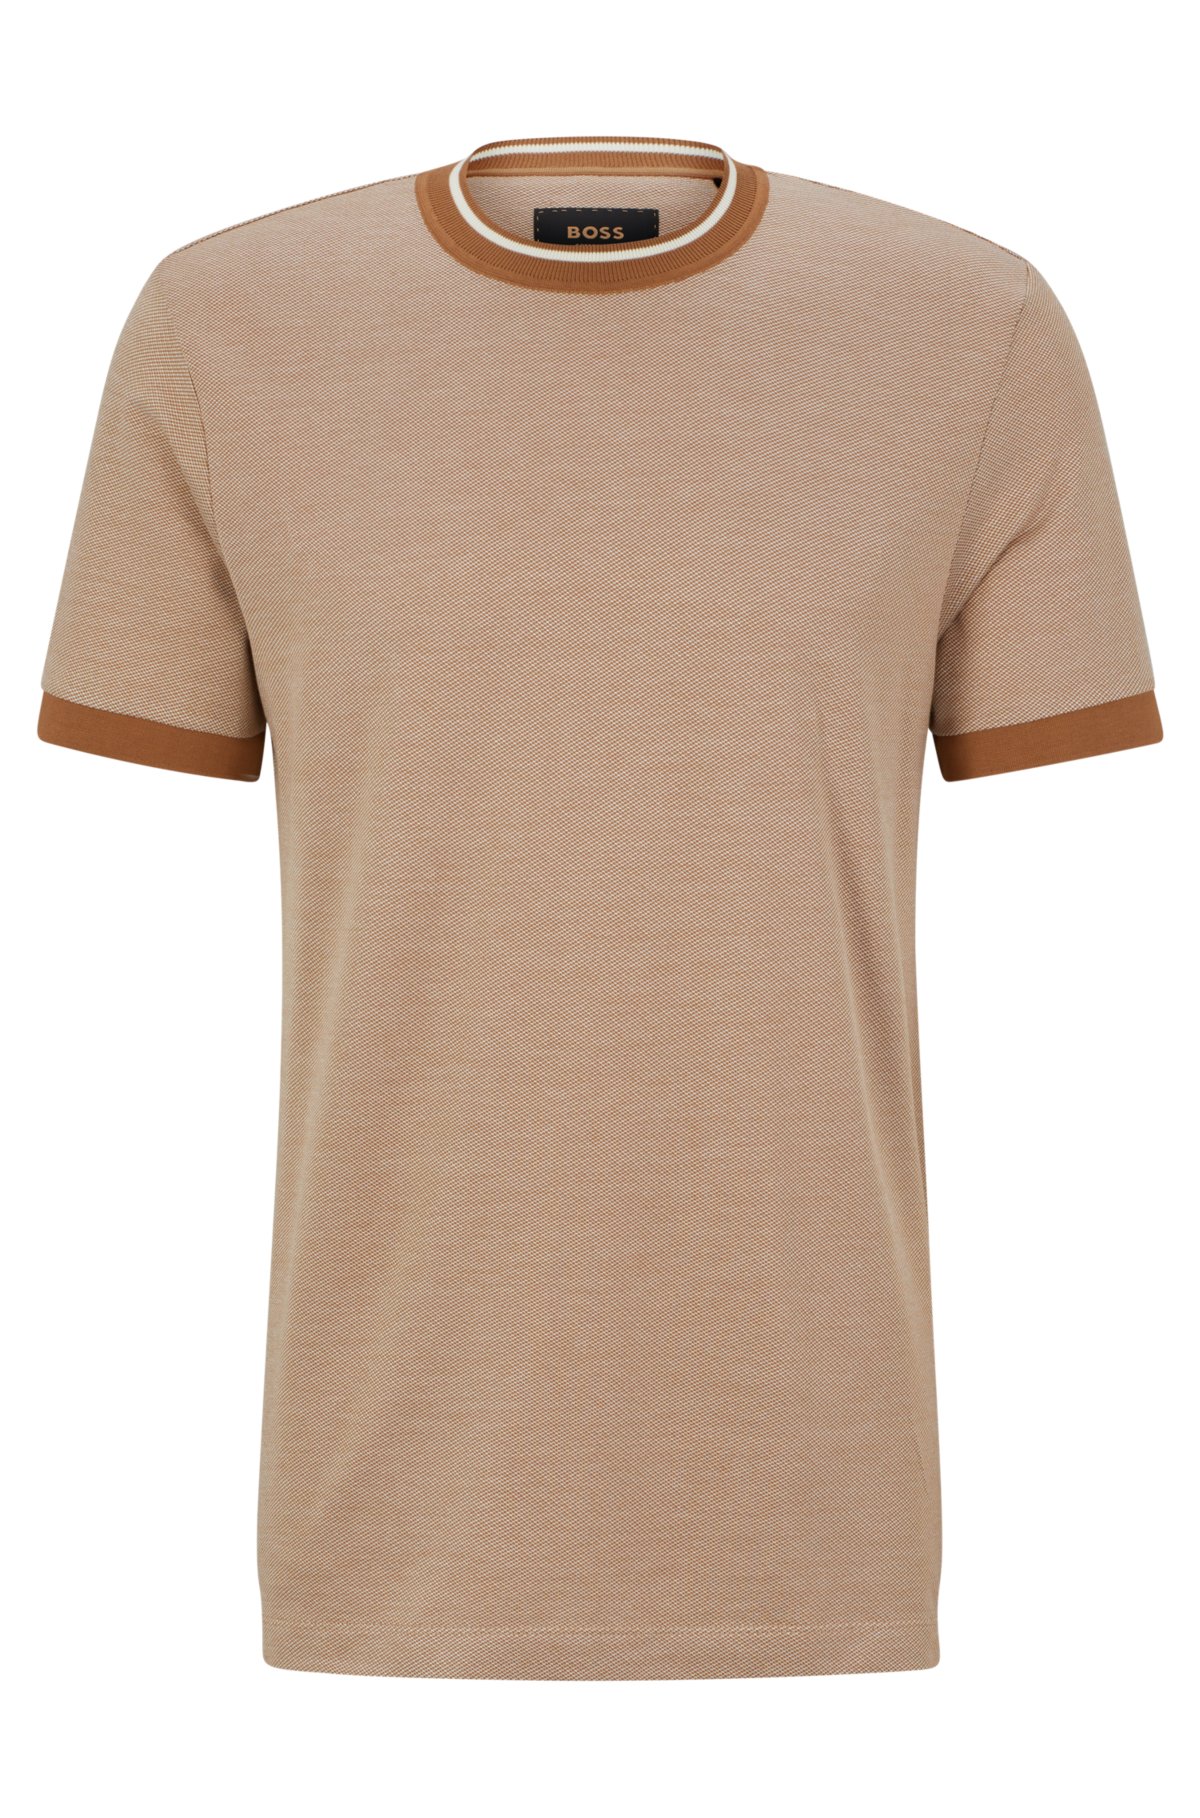 BOSS - Micro-pattern T-shirt in and silk cotton